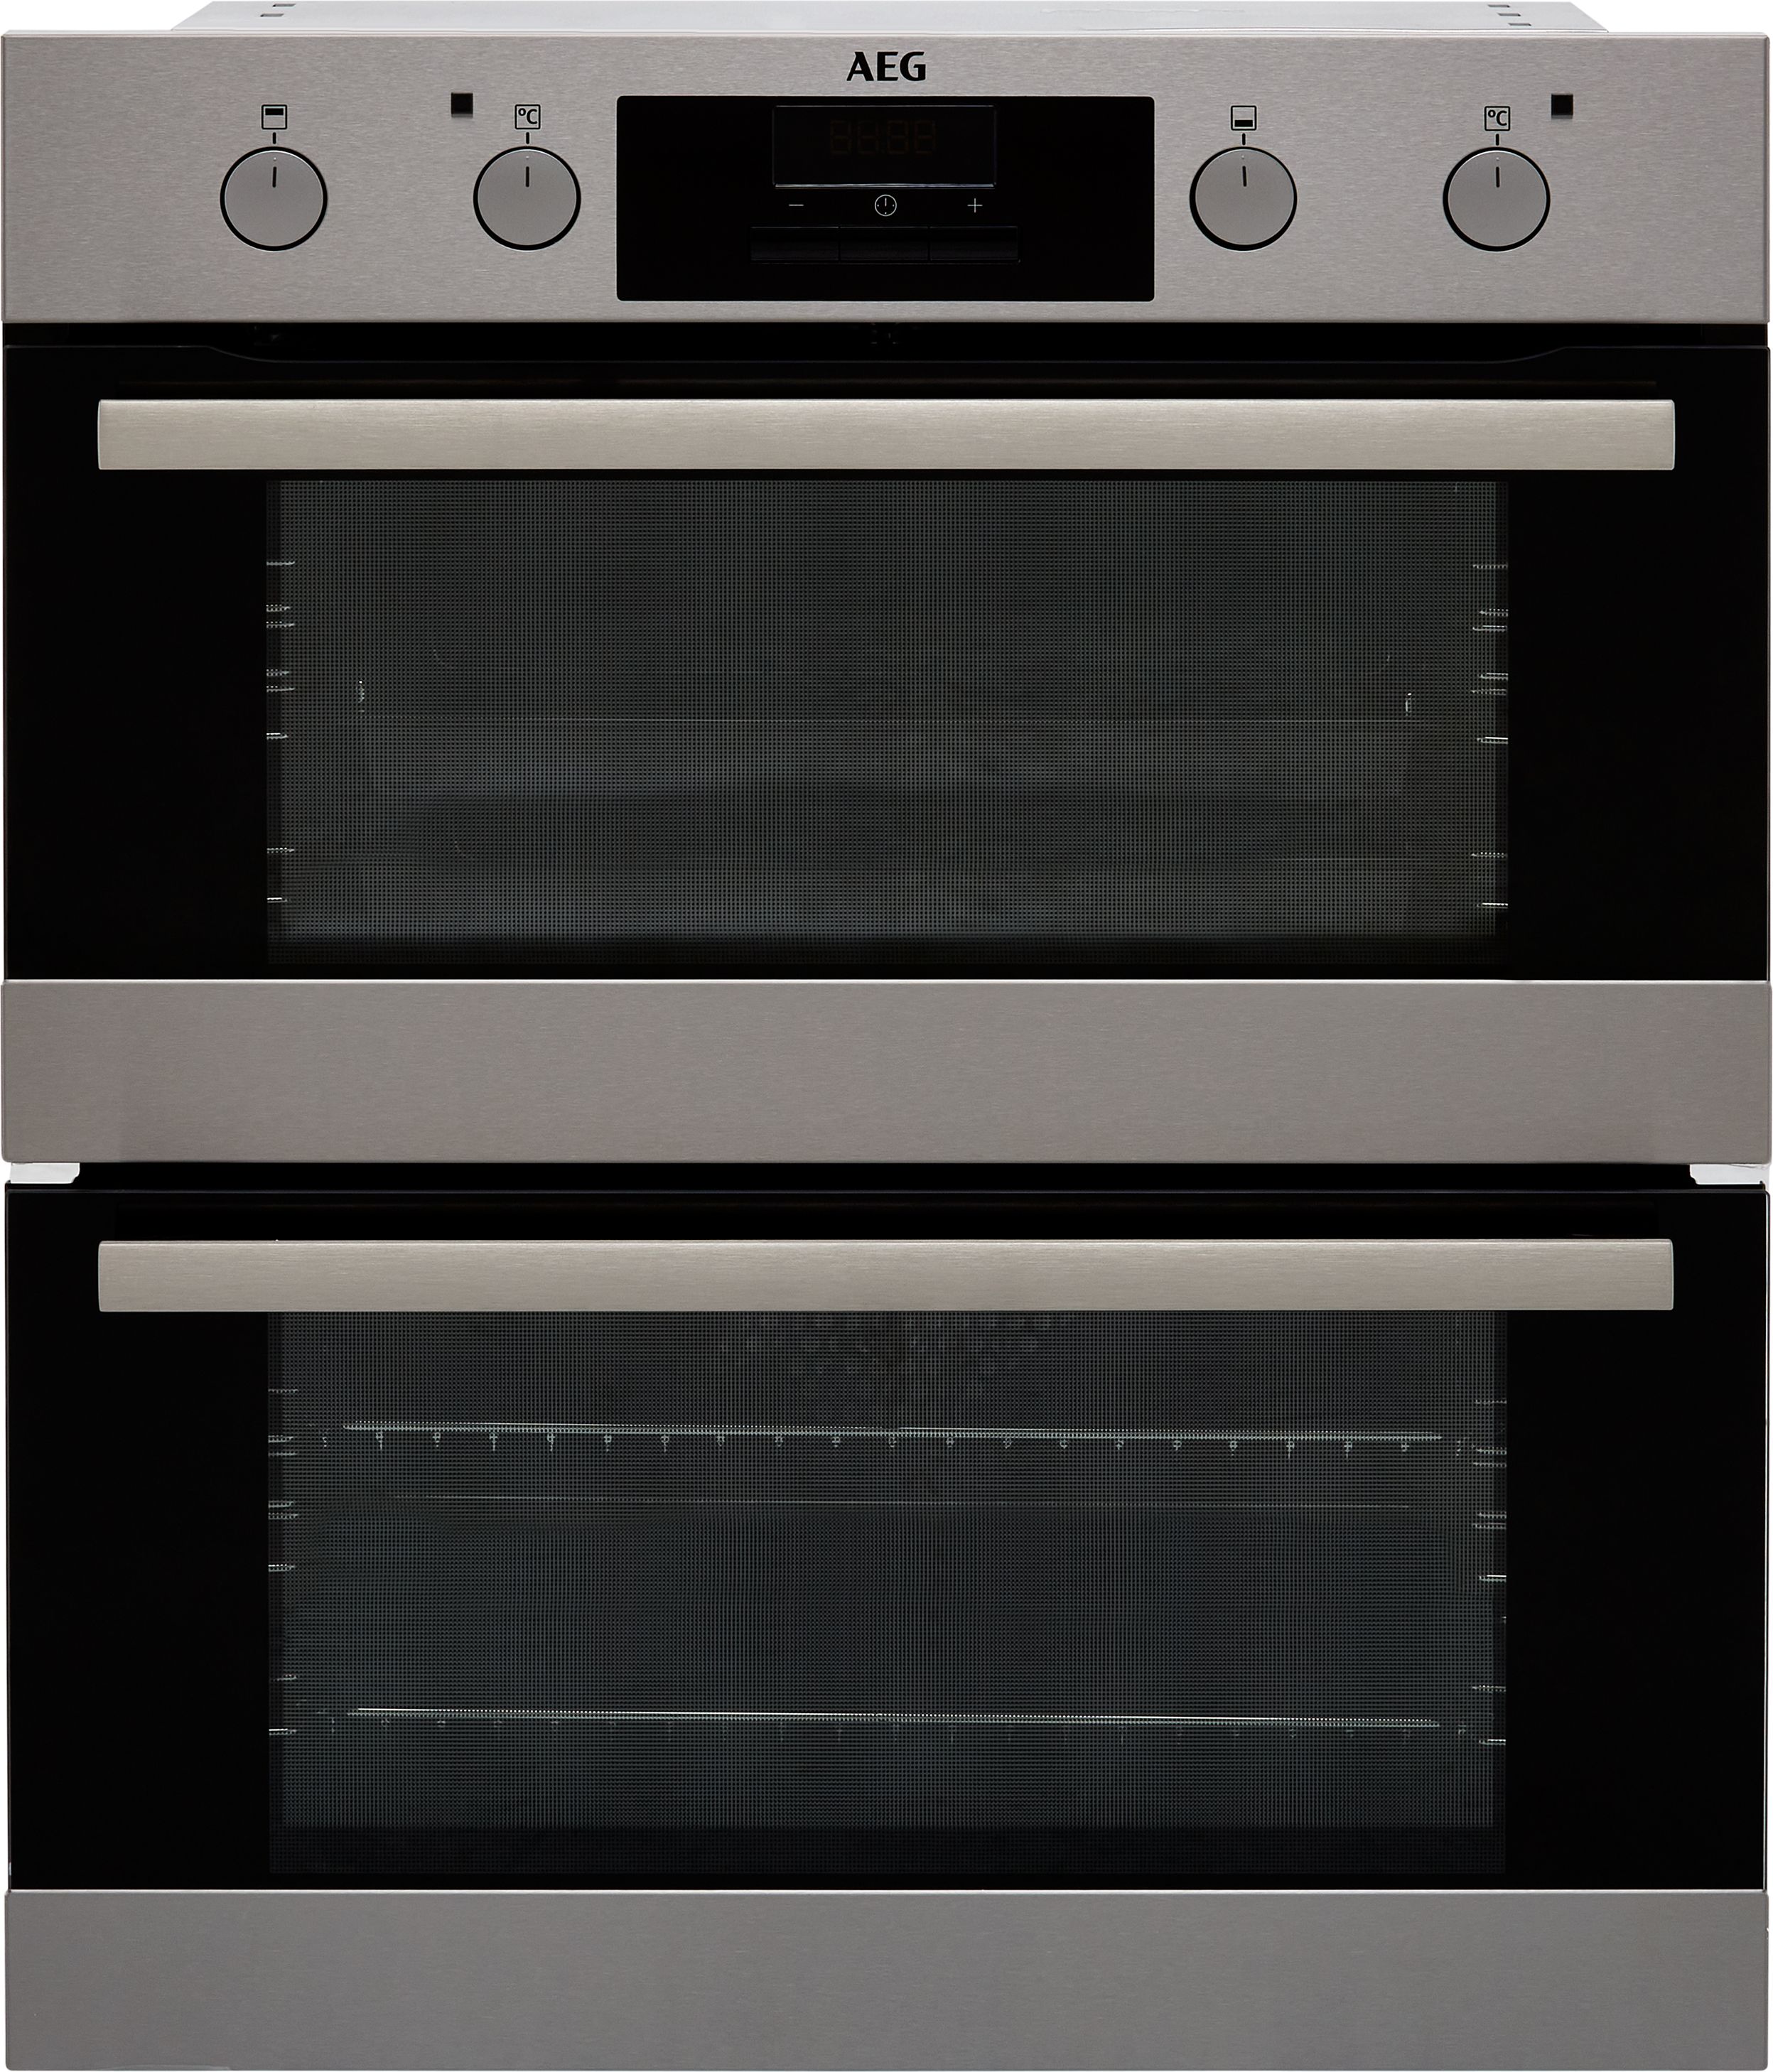 AEG DUB331110M Built Under Electric Double Oven - Stainless Steel - A/A Rated, Stainless Steel